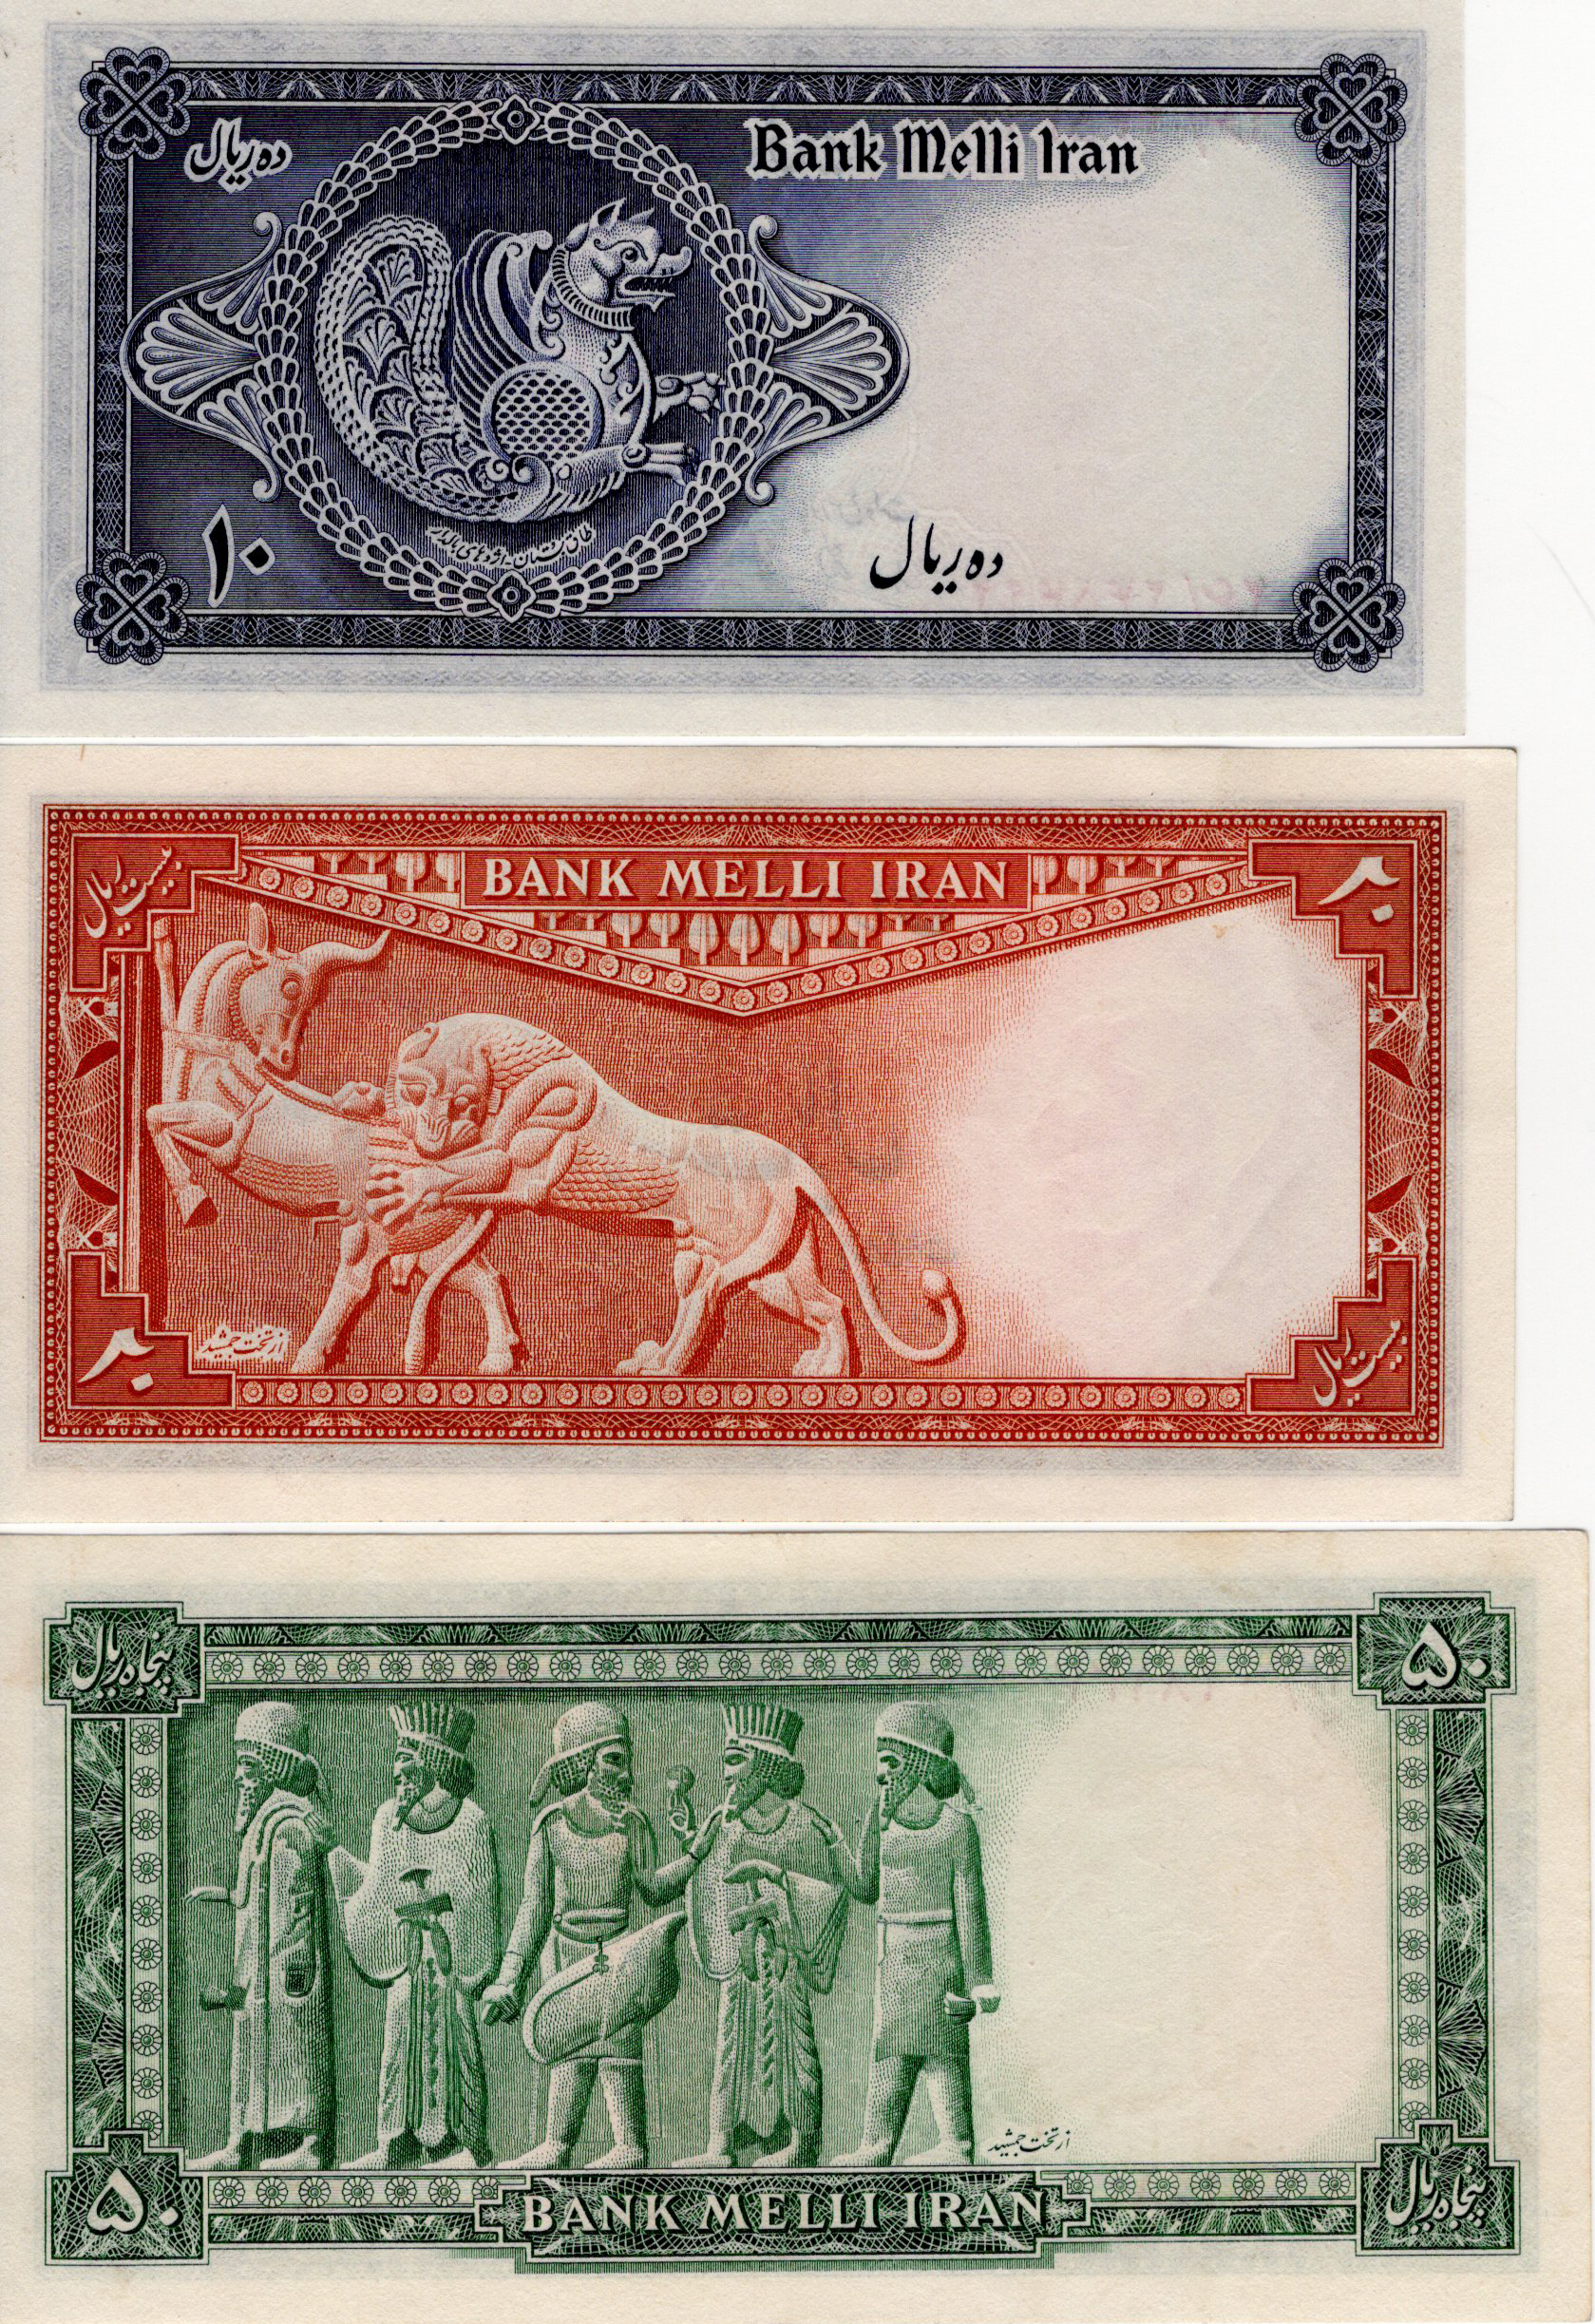 Iran (3) 10 Rials, 20 Rials & 50 Rials not dated issued 1948, (TBB B142a - B144a, Pick47 - 49), - Image 2 of 2